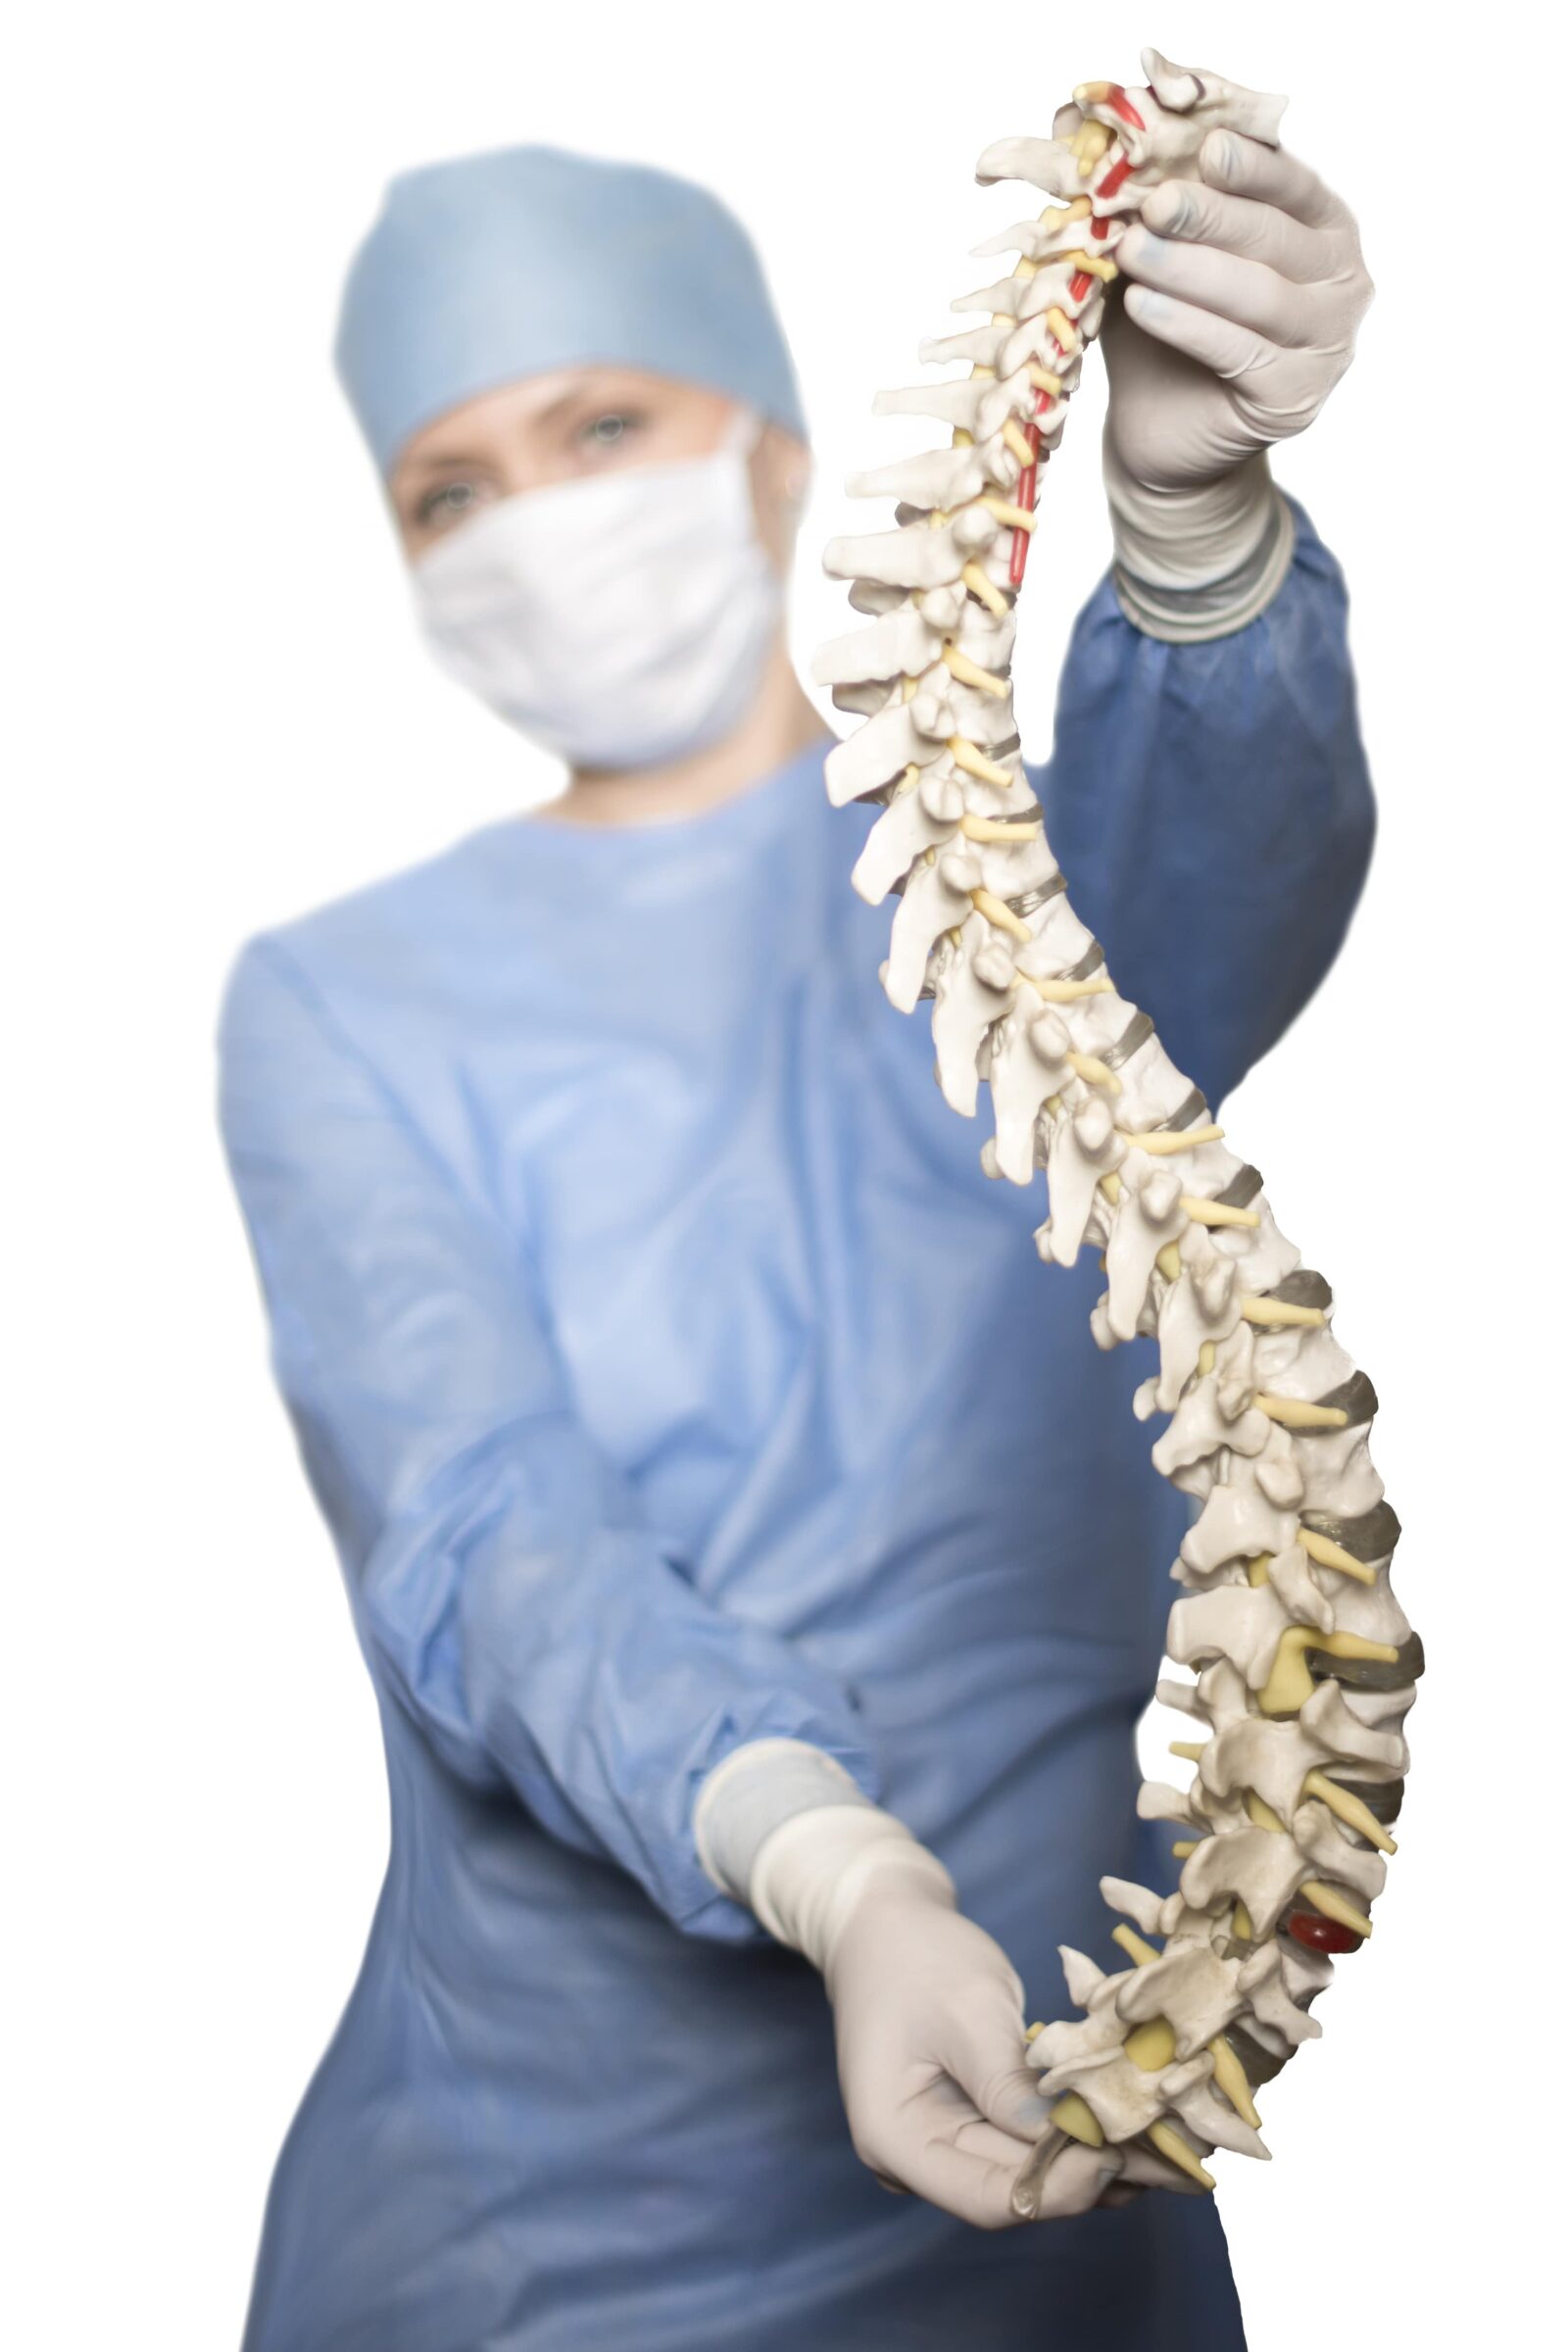 spinal surgeon holding model of the spine